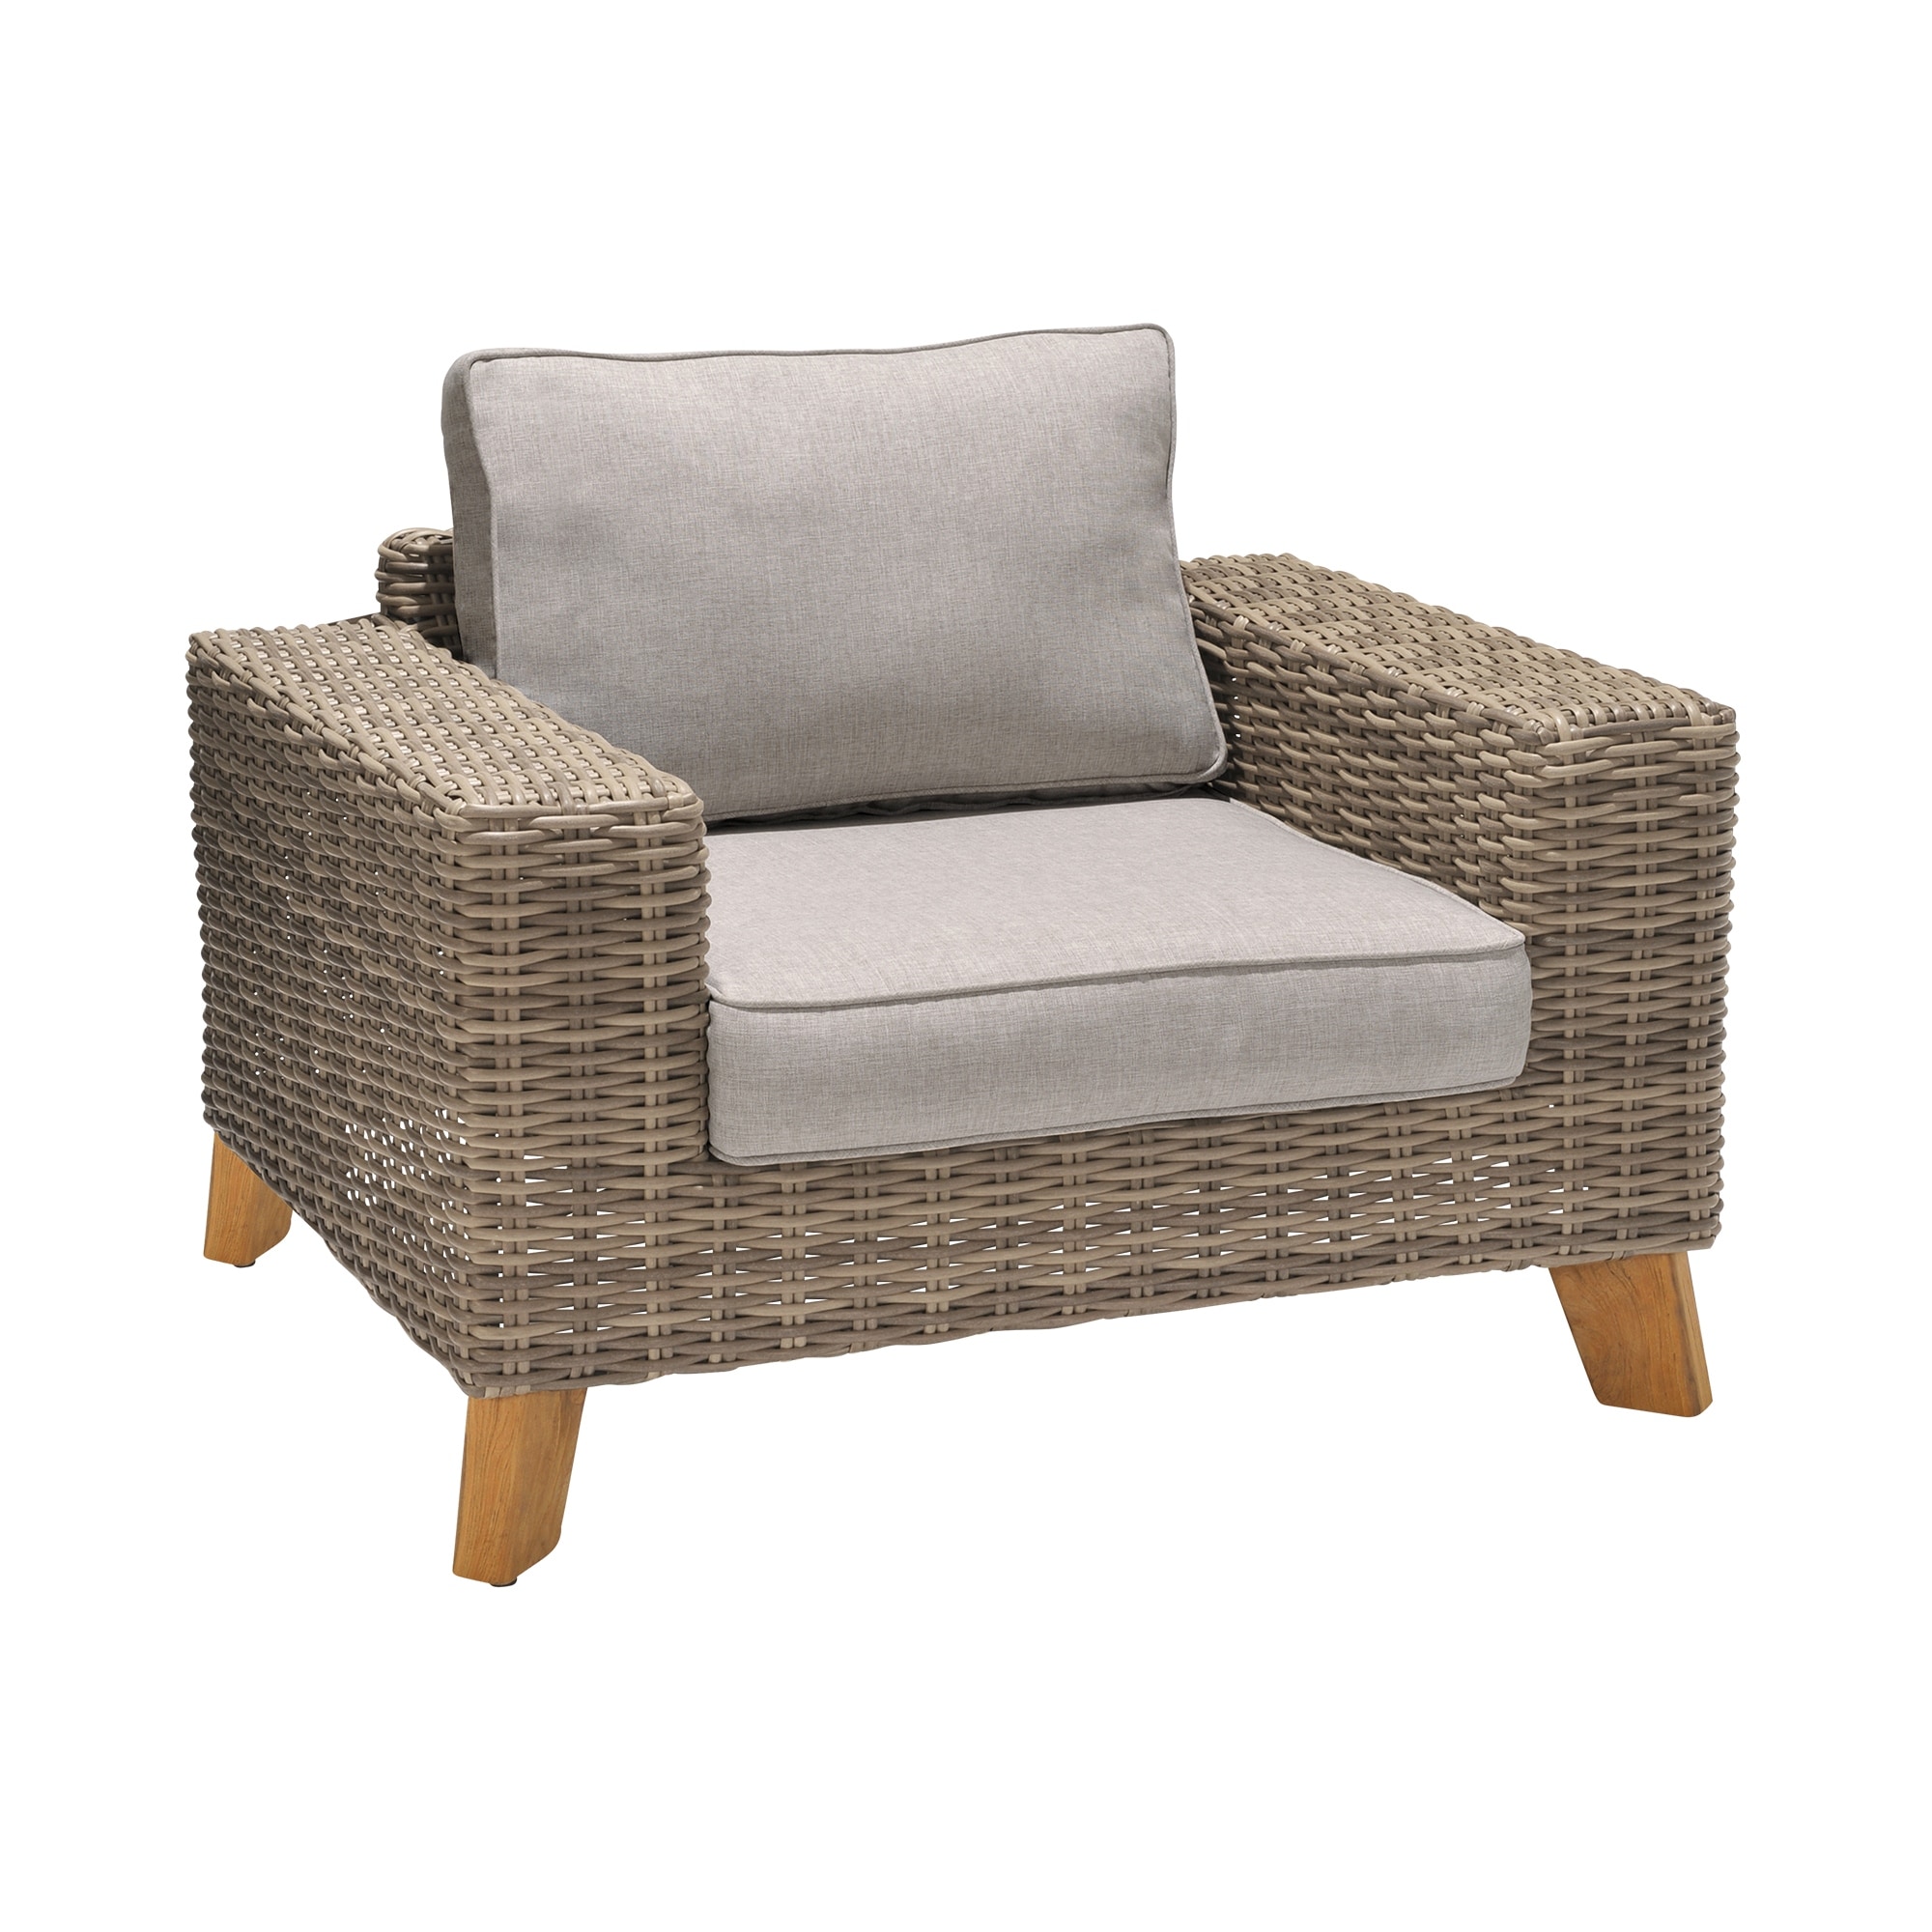 Bahamas Outdoor Wicker and Teak Wood Lounge Chair With Beige Olefin